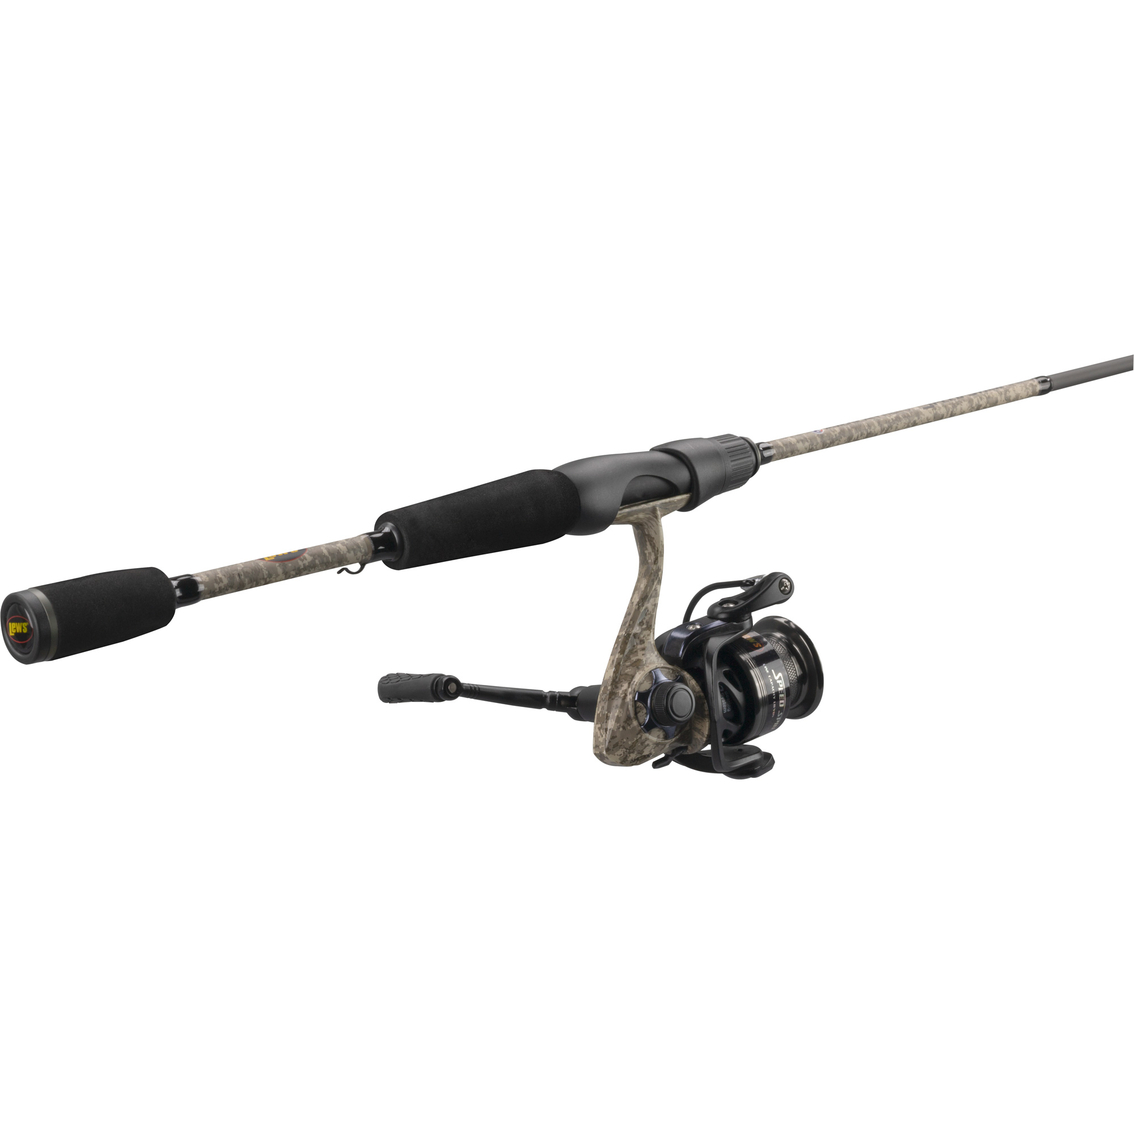 Lew's American Hero Camo Speed Spin Rod and Reel Combo IM7 - Image 6 of 6